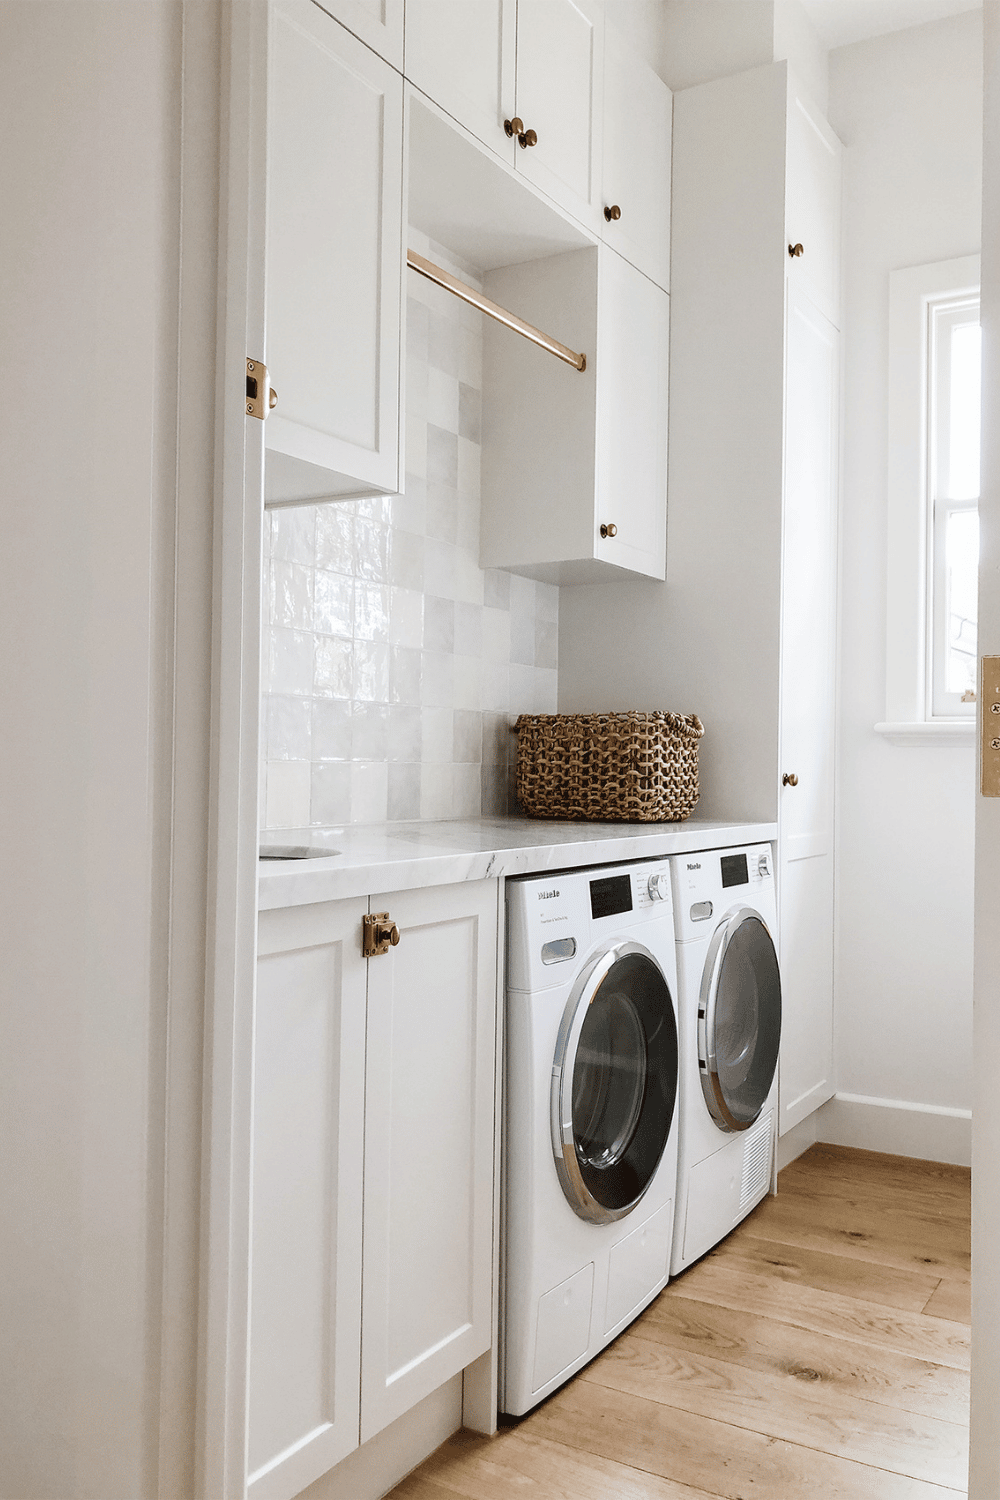 Luxurious Laundry Rooms